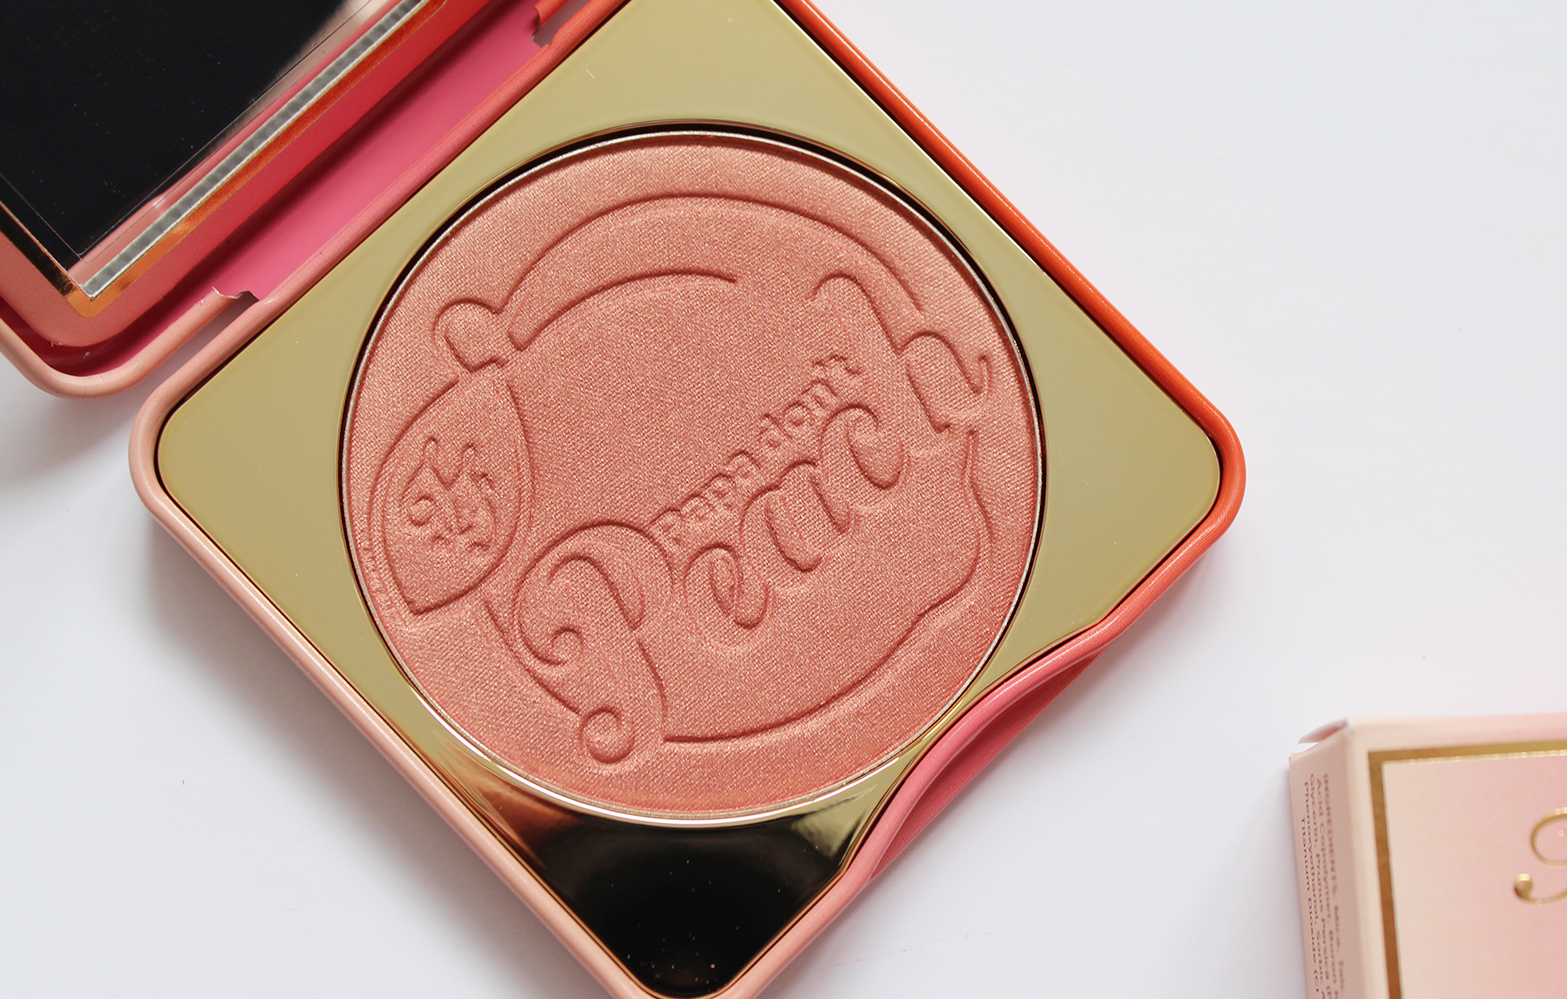 TOO FACED | Sweet Peach Eyeshadow Collection + Papa Don't Peach Peach-Infused Blush - Review + Swatches - CassandraMyee